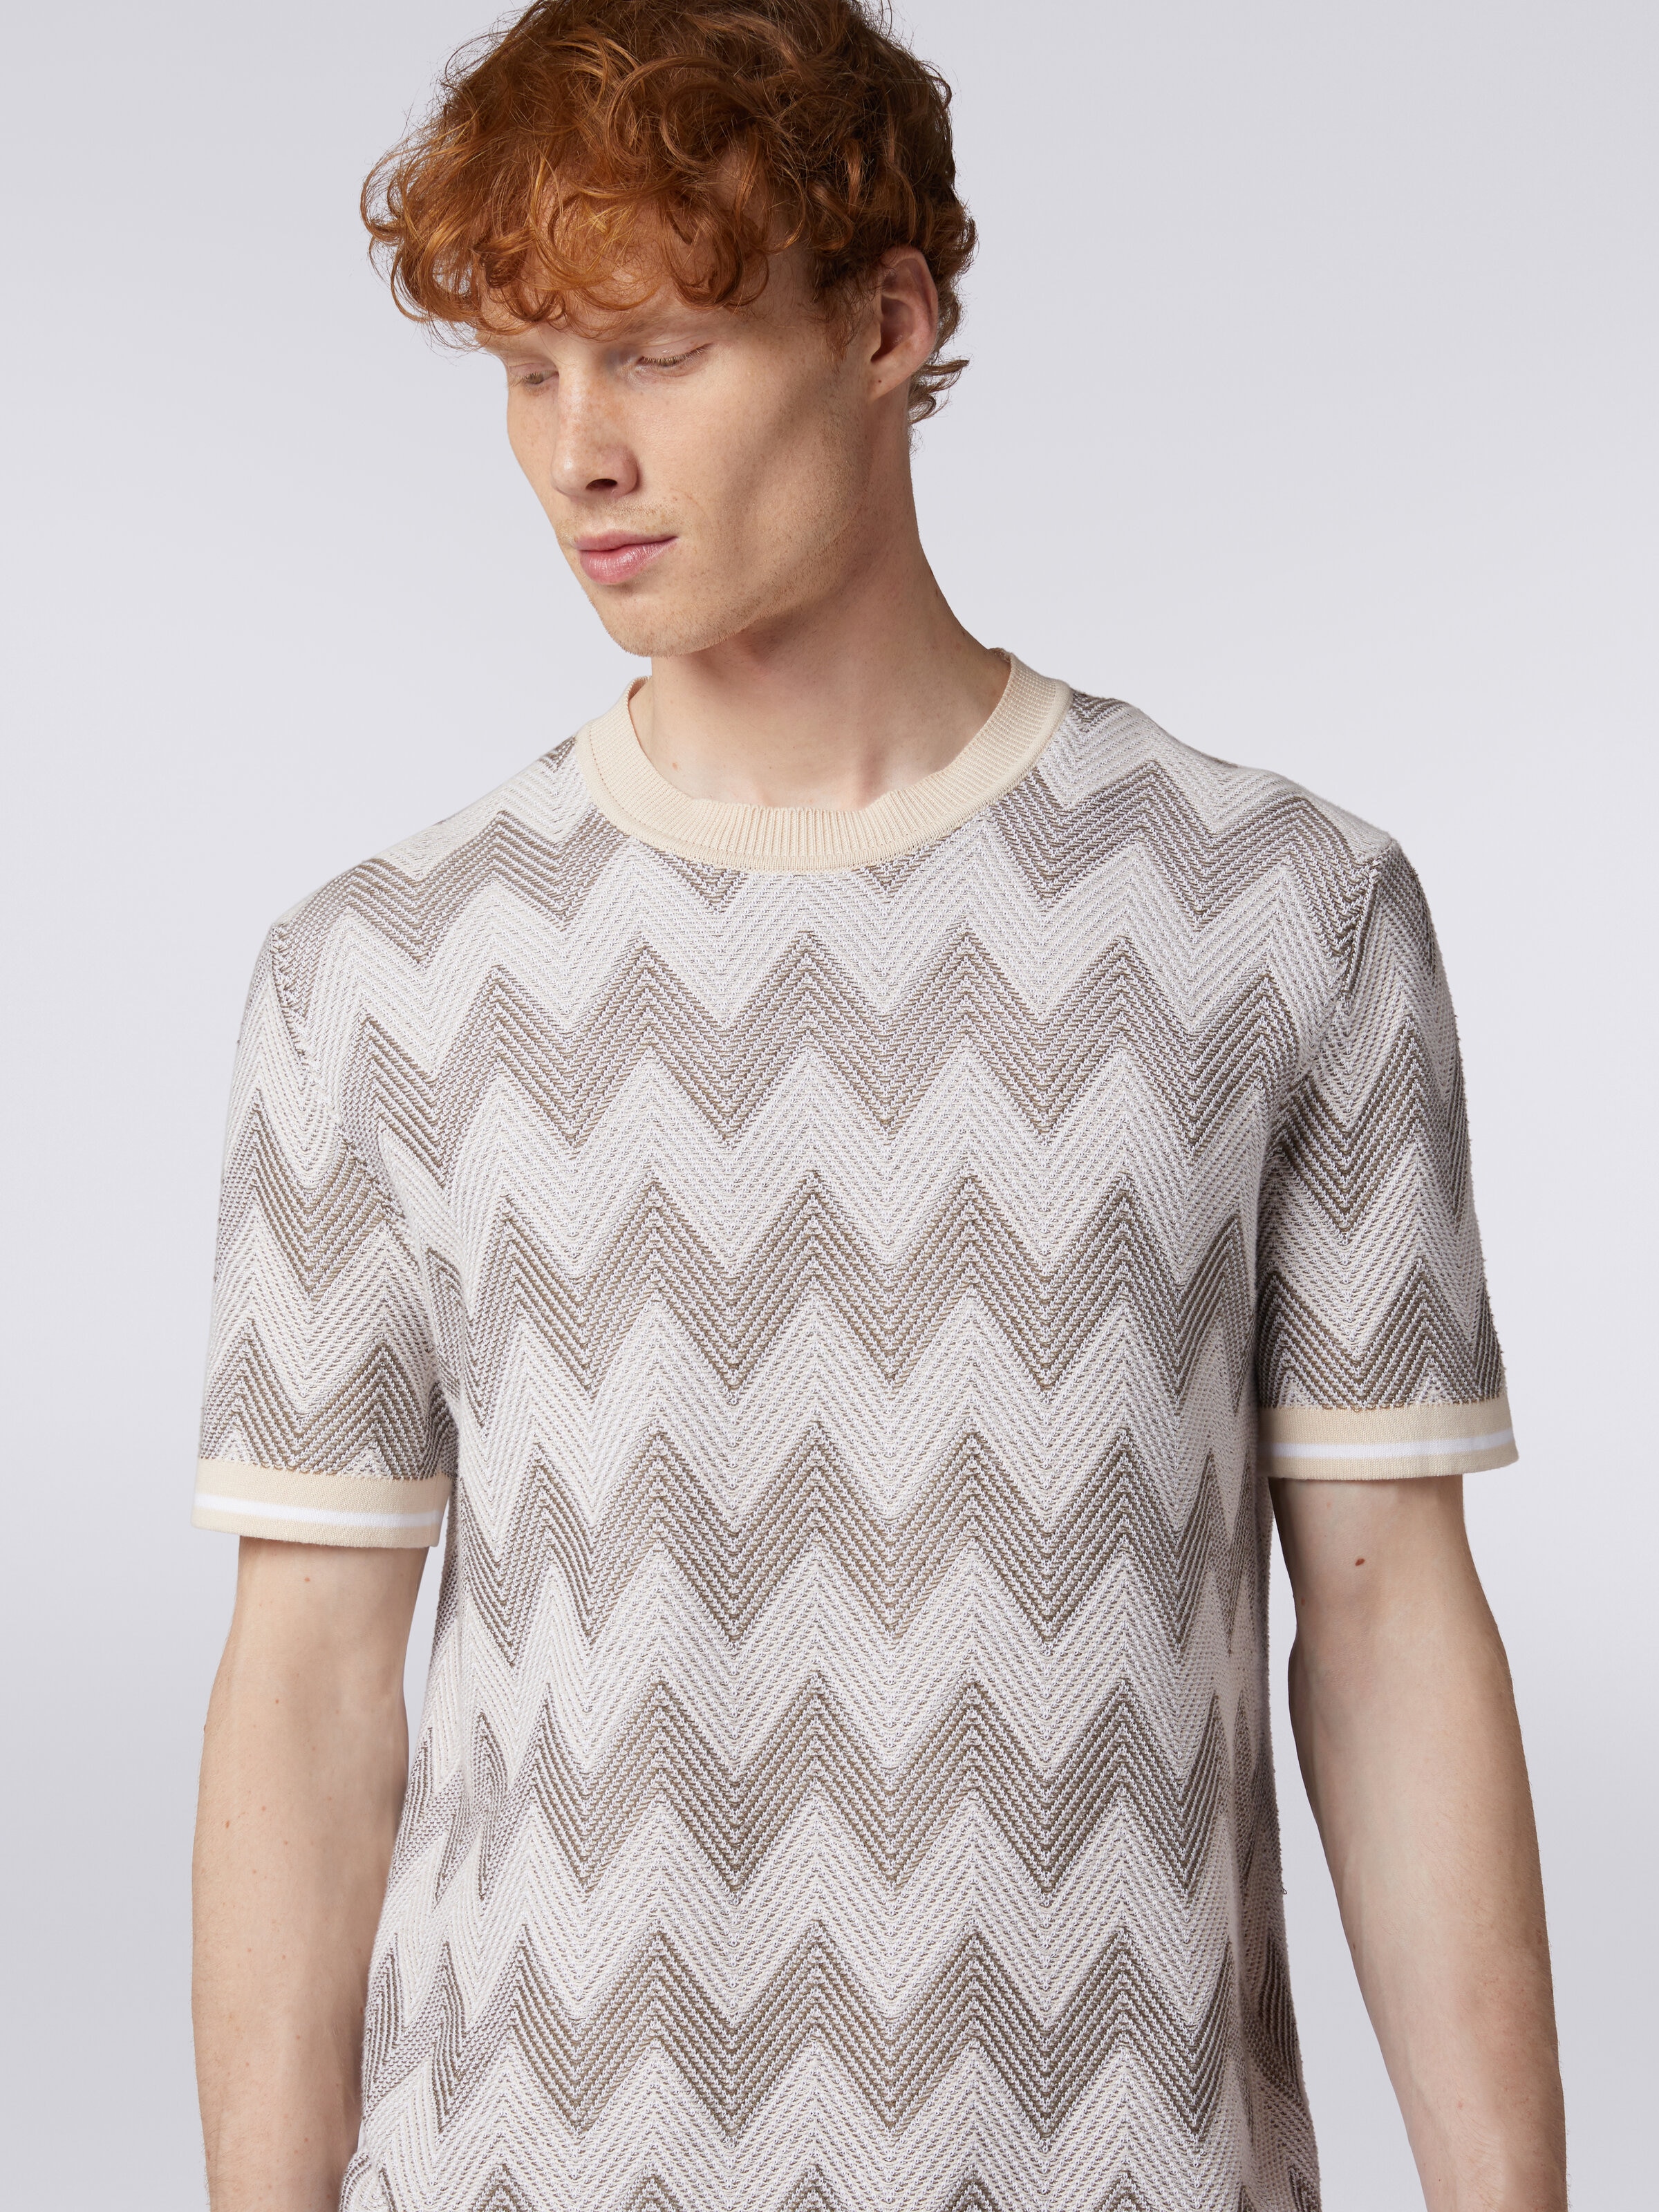 T-shirt in chevron cotton knit with contrasting trim, Multicoloured  - 4